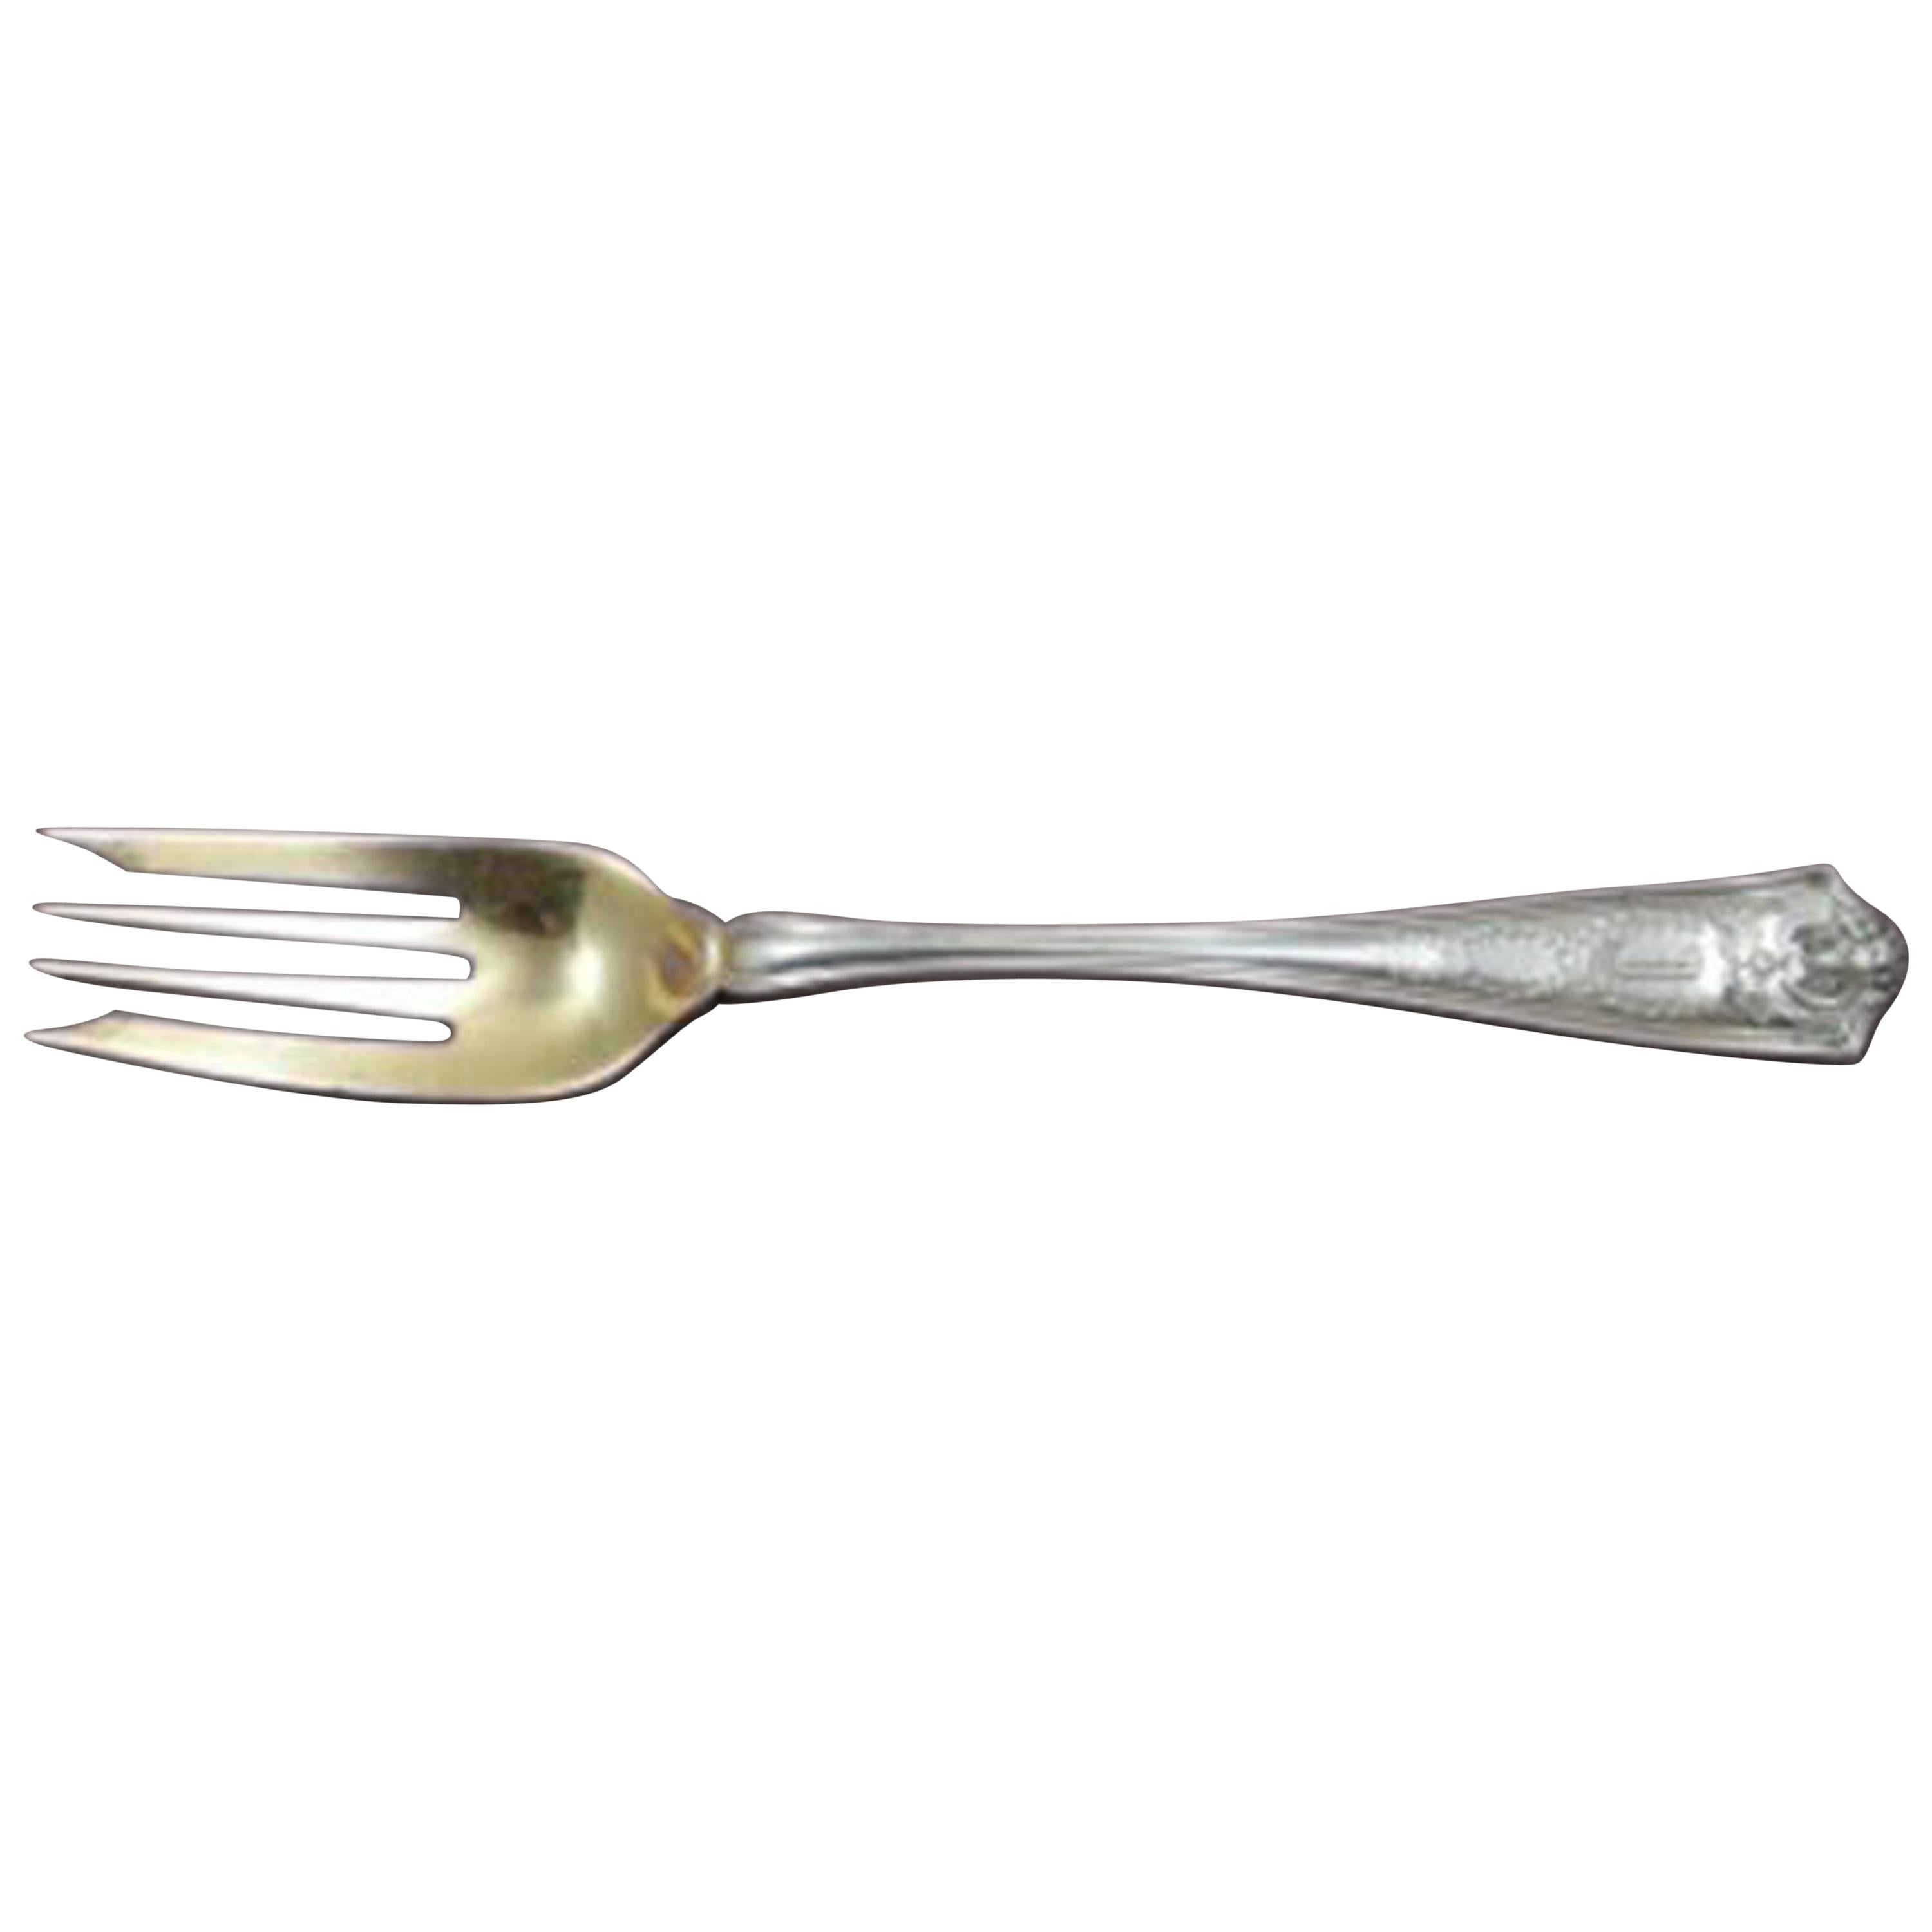 Winthrop by Tiffany & Co. Sterling Silver Salad Fork Gold Washed 4-Tine